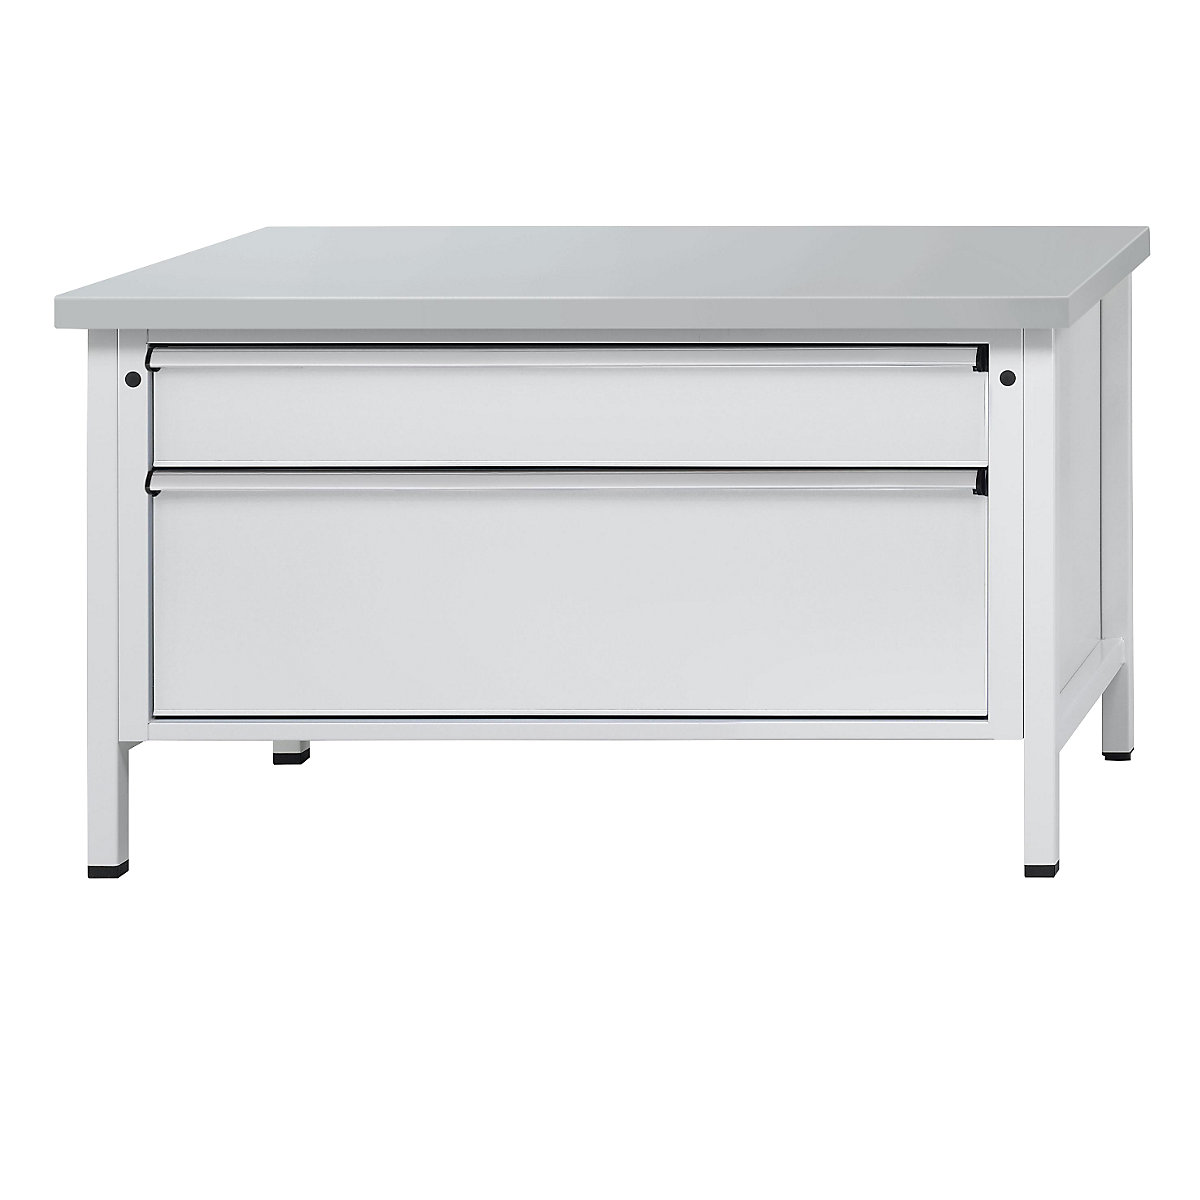 Workbench with XL/XXL drawers, frame construction – ANKE, width 1500 mm, 2 drawers, sheet steel covered worktop, front in light grey-9